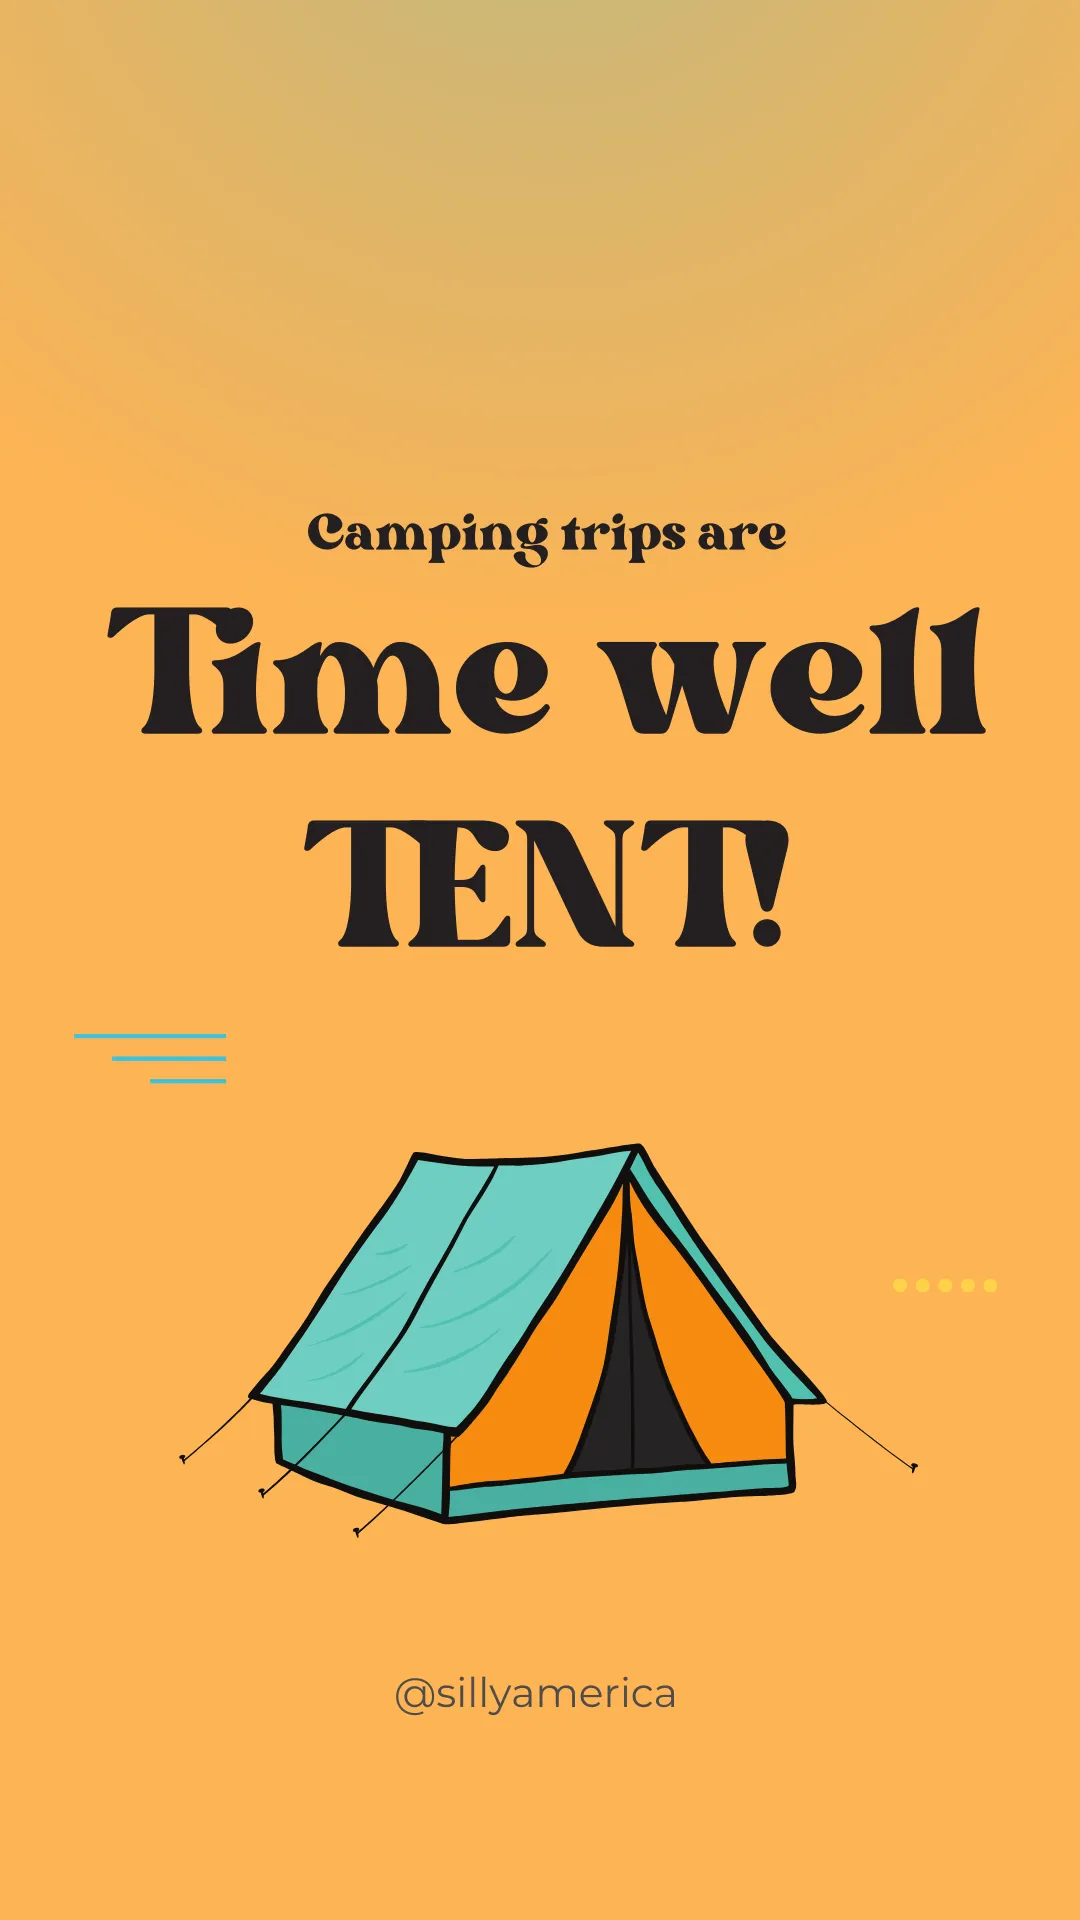 Camping trips are time well TENT! - Road Trip Puns